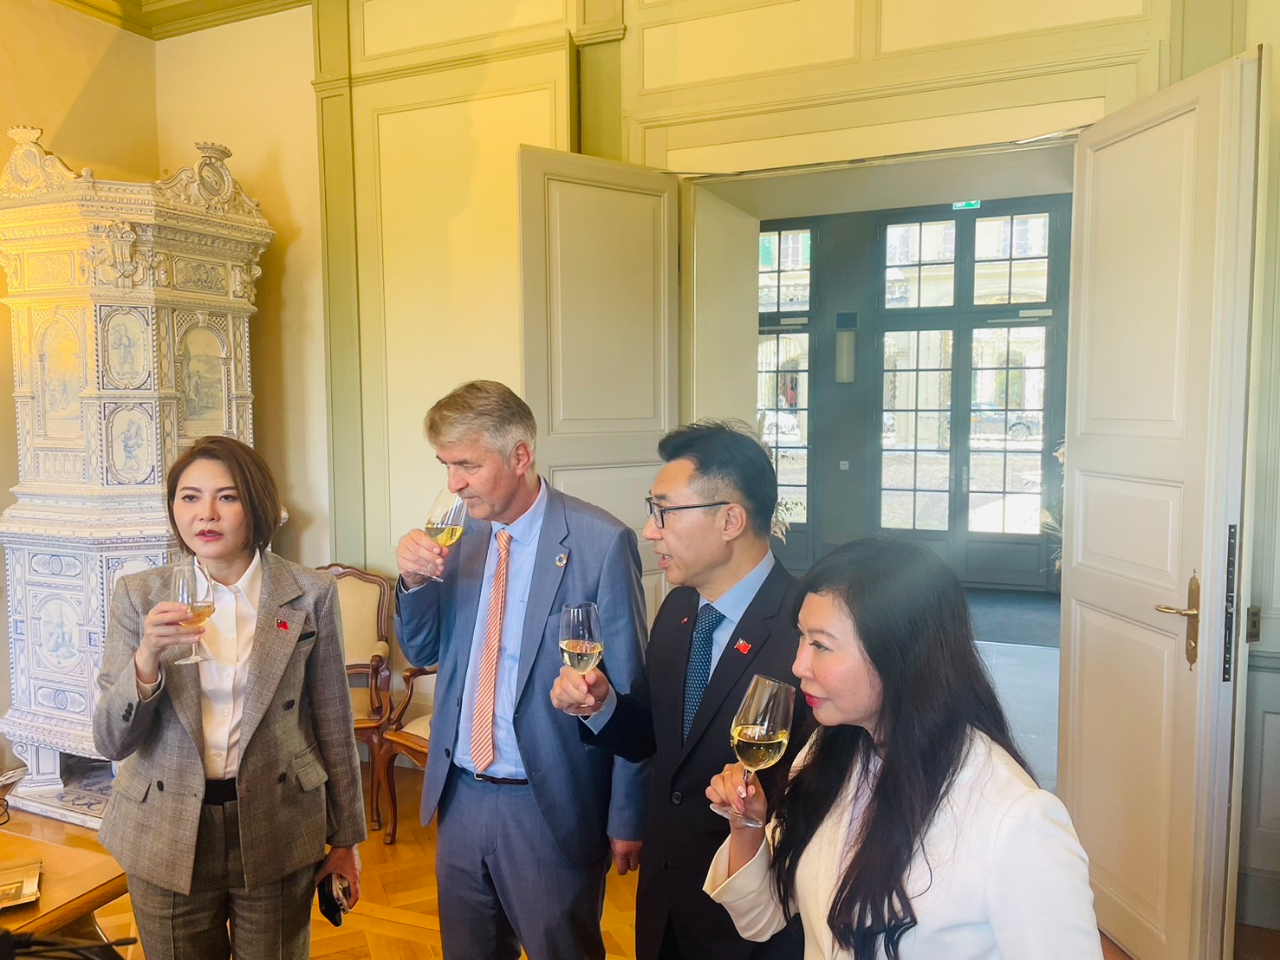 Johnny Chiang, the Vice President of Legislative Yuan, led a parliamentarian delegation to Bern and met with Mayor of Bern, Mr. Alex von Graffenried.